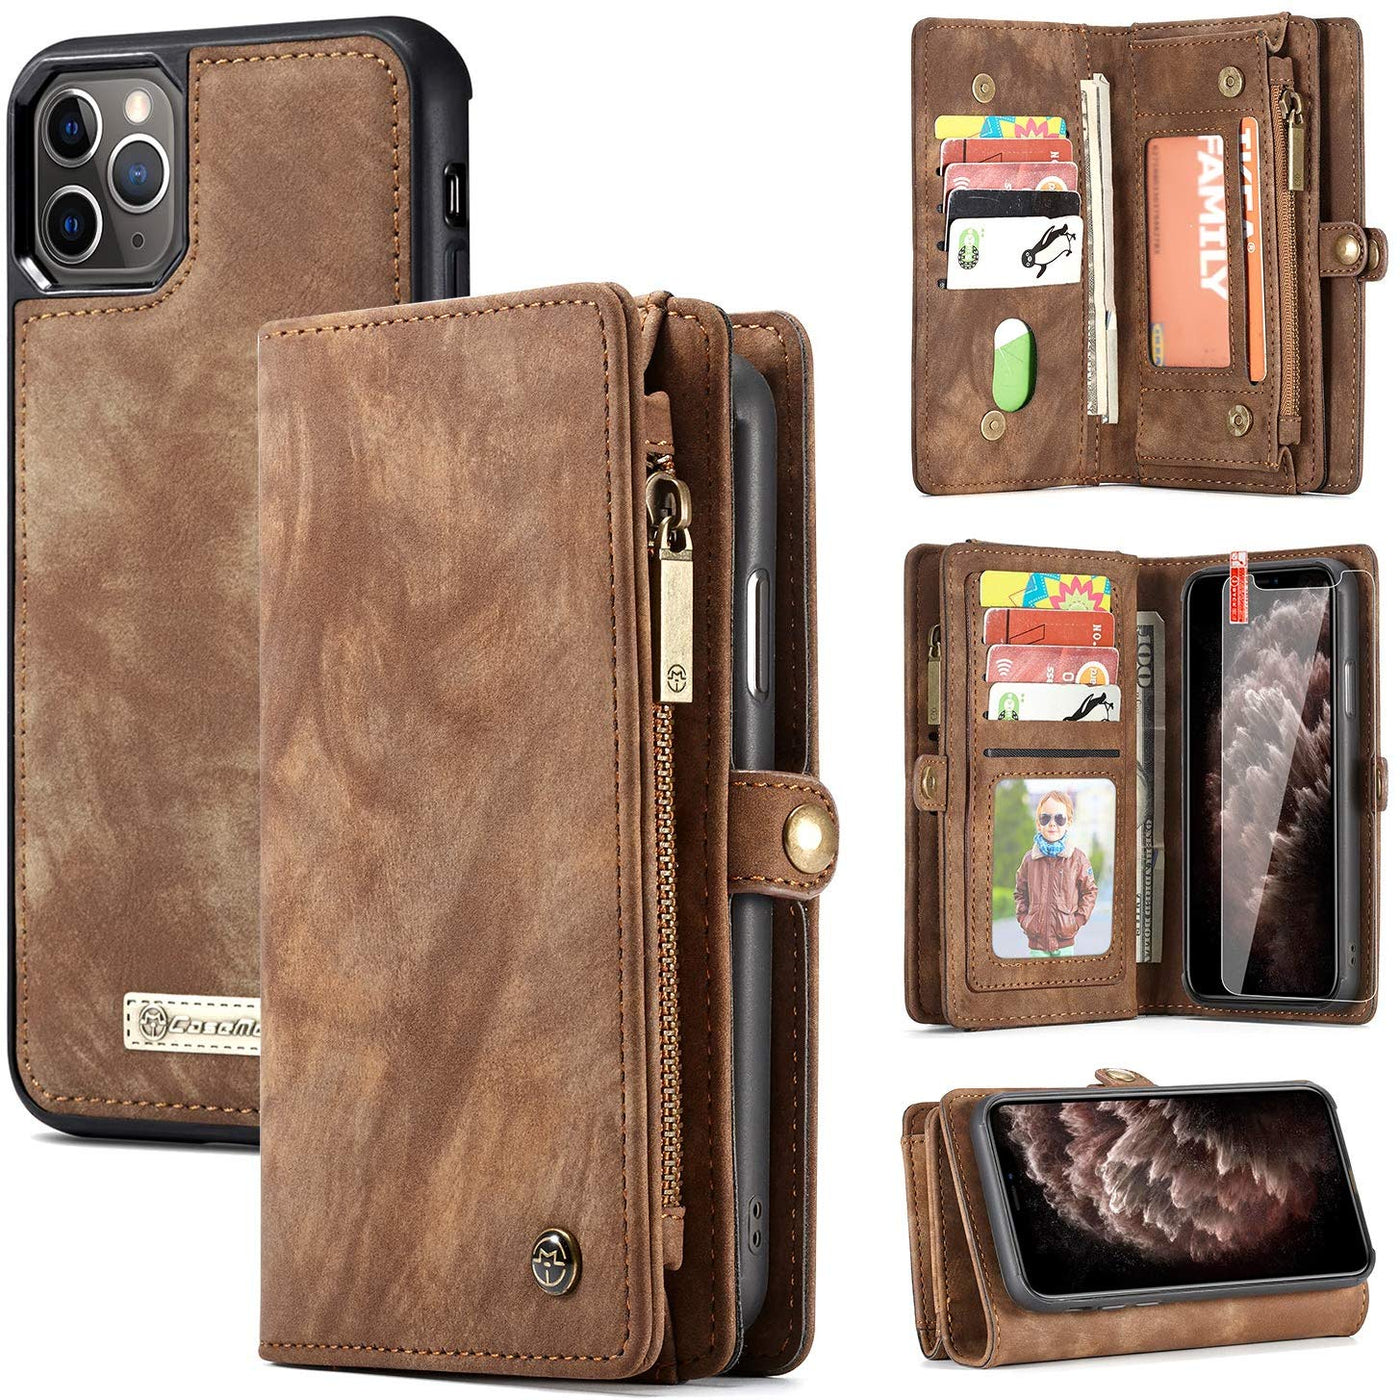 Apple iPhone 11 Pro Max leather multifunctional wallet case cover by excelsior